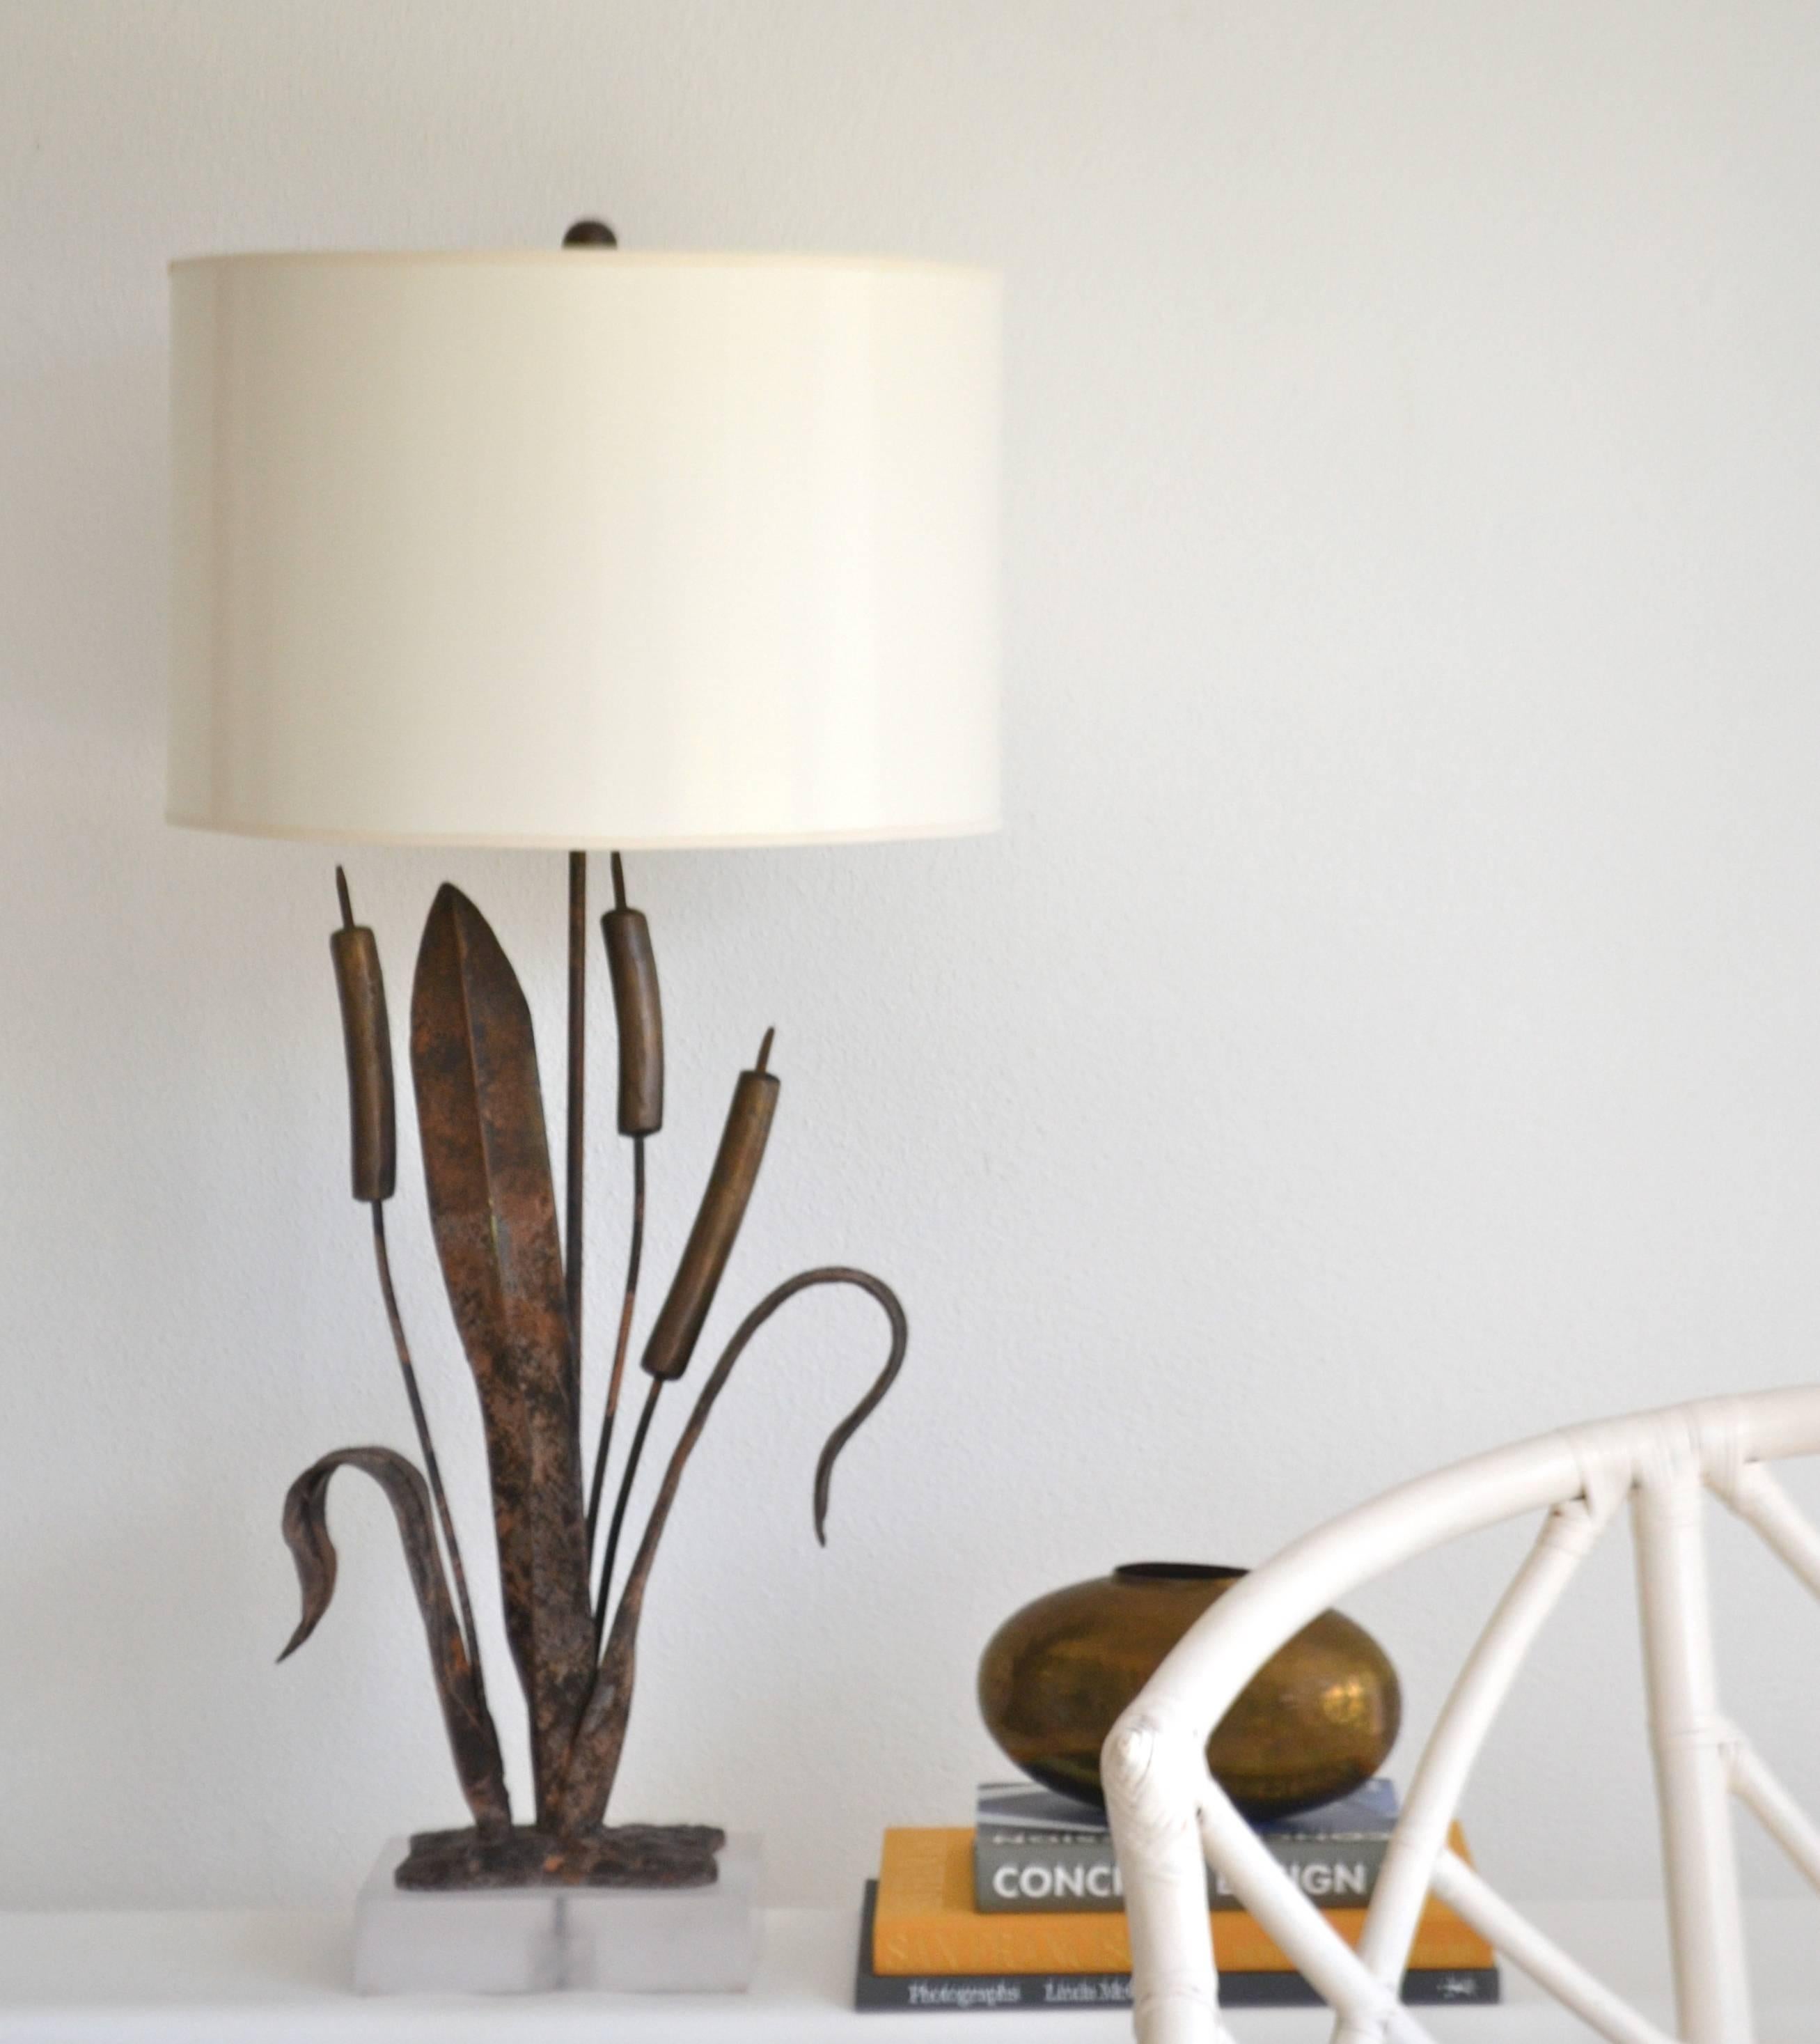 Striking Postmodern Brutalist inspired table Lamp, circa 1970s-1980s. This sculptural hand-wrought cattail form lamp is mounted on a Lucite base and wired with brass double cluster fittings.
Shade not included.
Measurements:
Overall: 36